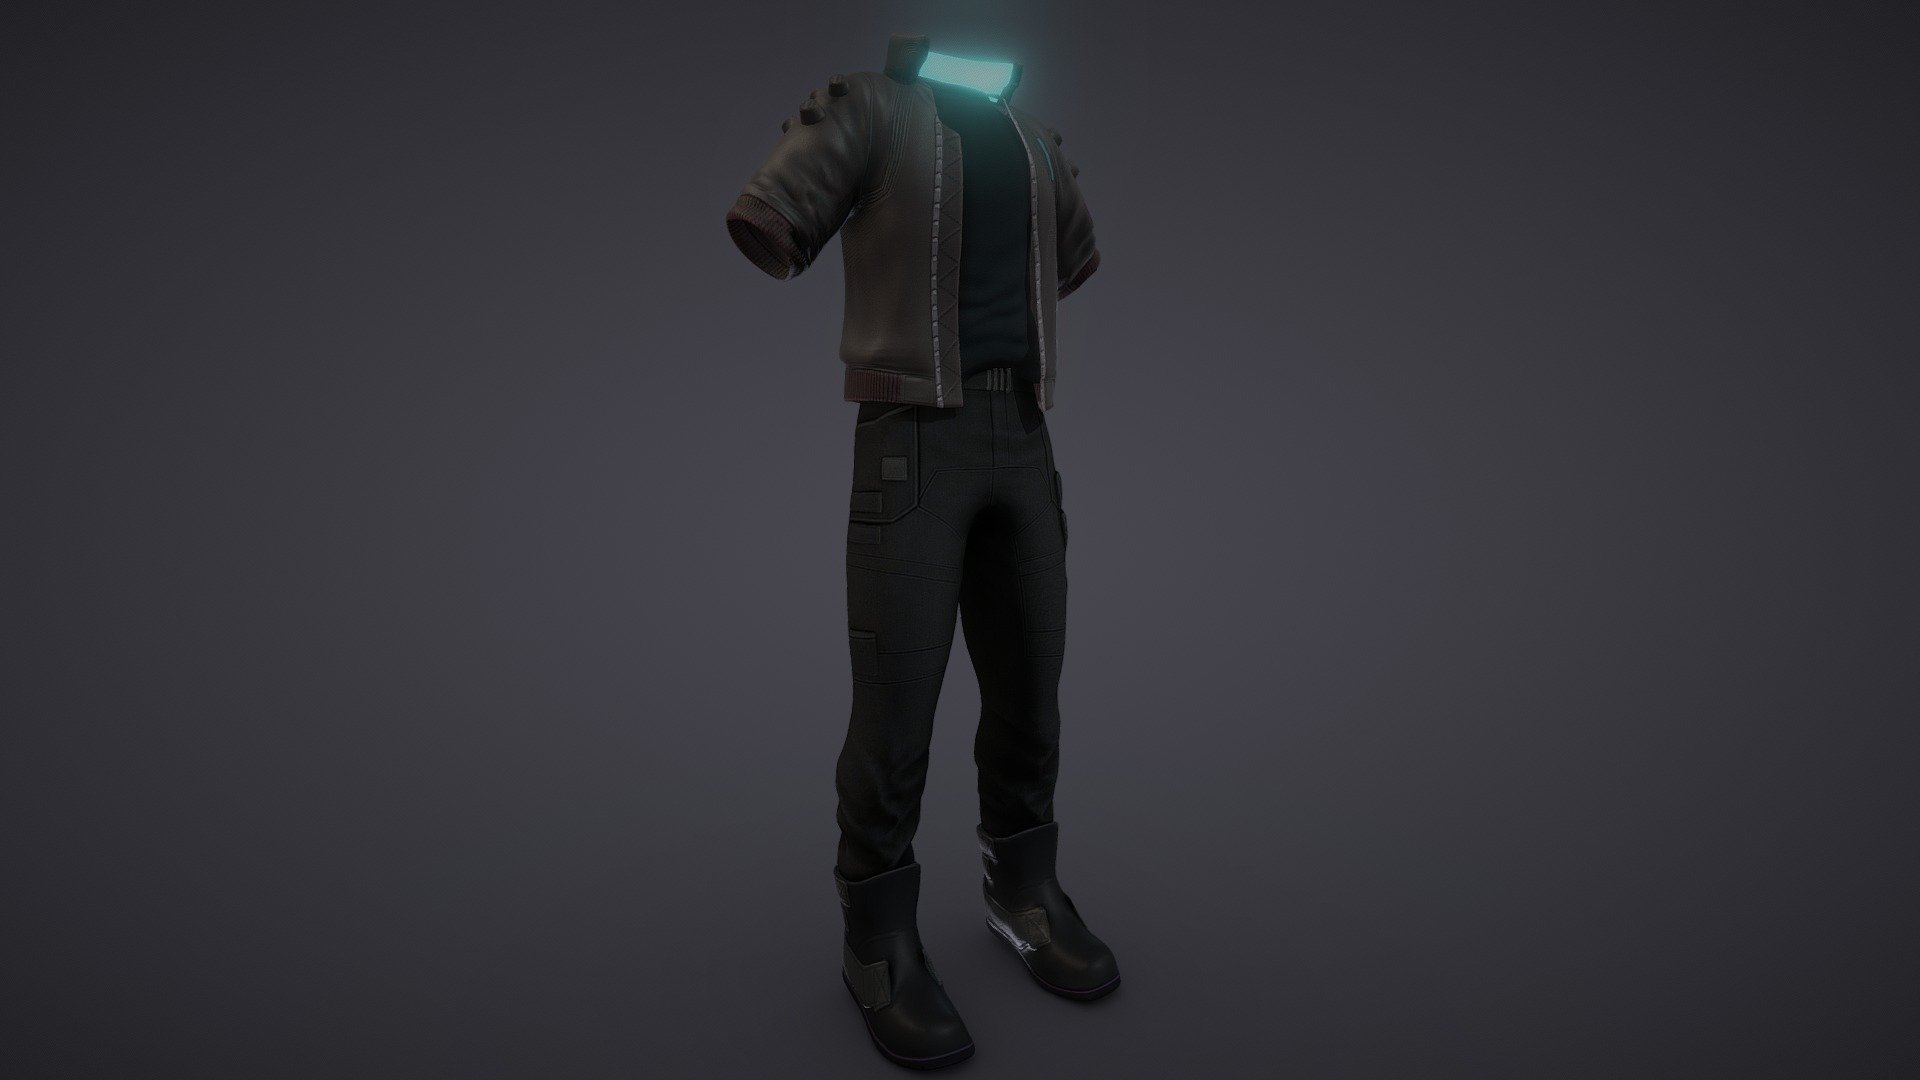 Jacket&amp;Tshirt, Pants, Shoes (Separate objects)

Can fit to any character, ready for games

Quads, clean topology

No overlapping unwrapped UVs

High quality realistic textues : baked albedo, specular, normals, ao

FBX, OBJ, gITF, USDZ (request other formats)

PBR or Classic

Please ask for any other questions

Type     user:3dia &ldquo;search term